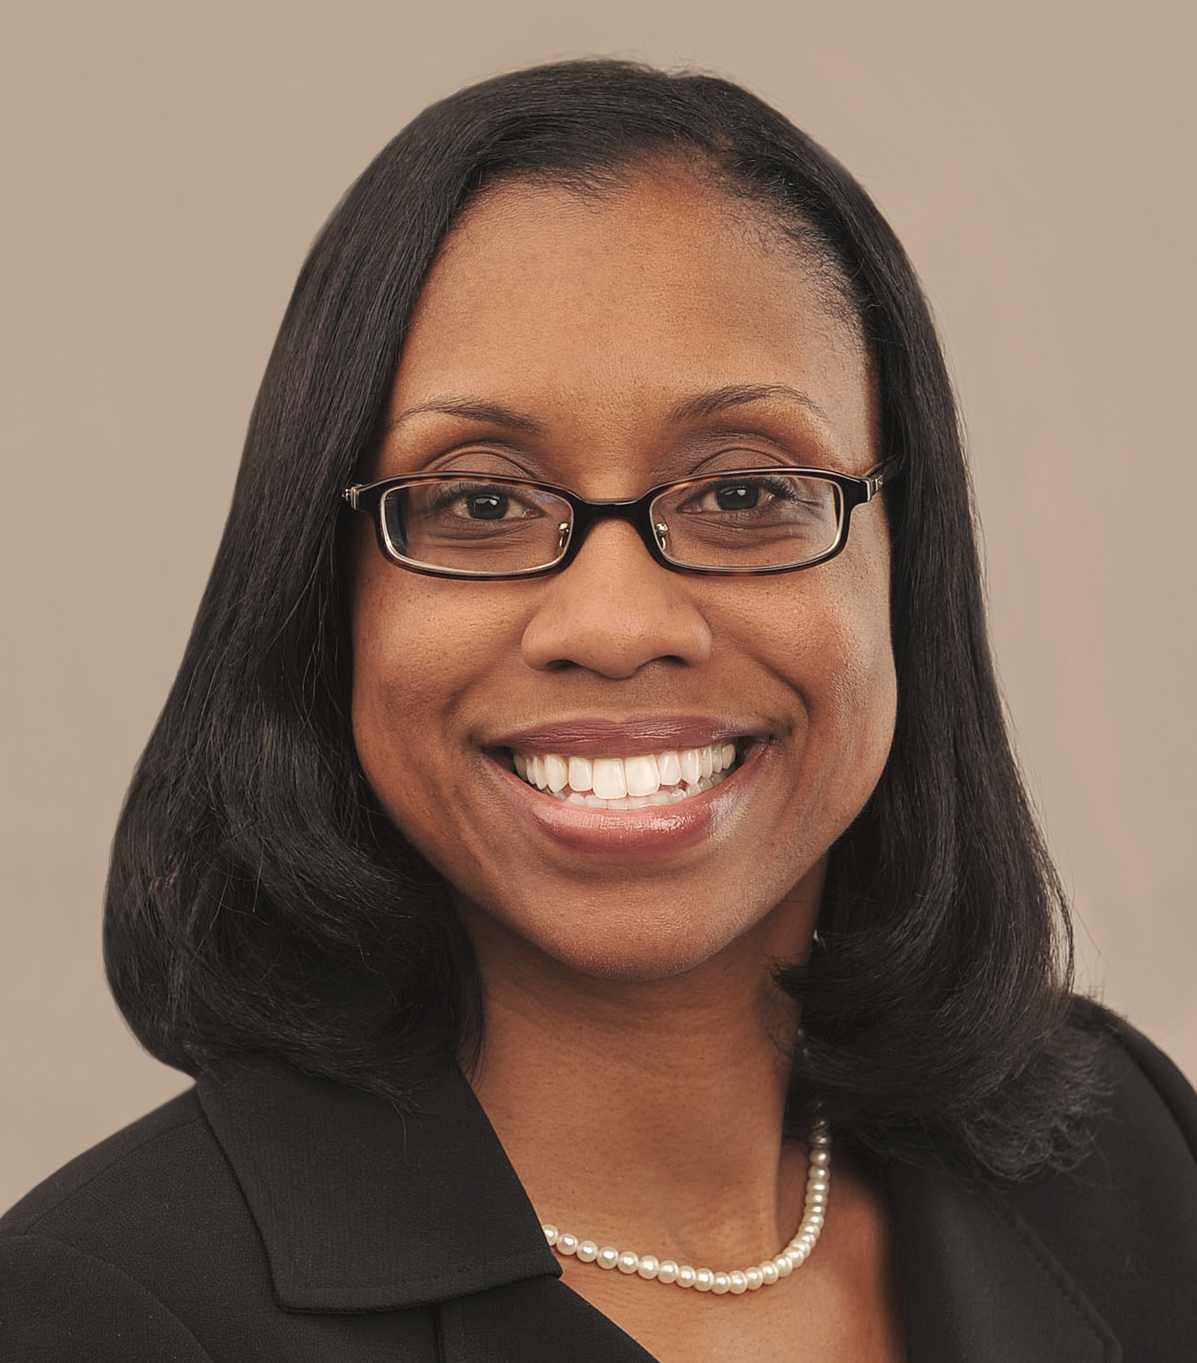 J. Nadine Gracia, MD, MSCE   President and CEO, Trust for America’s Health   Former HHS Deputy Assistant Secretary of Minority Health and Director of the Office of Minority Health